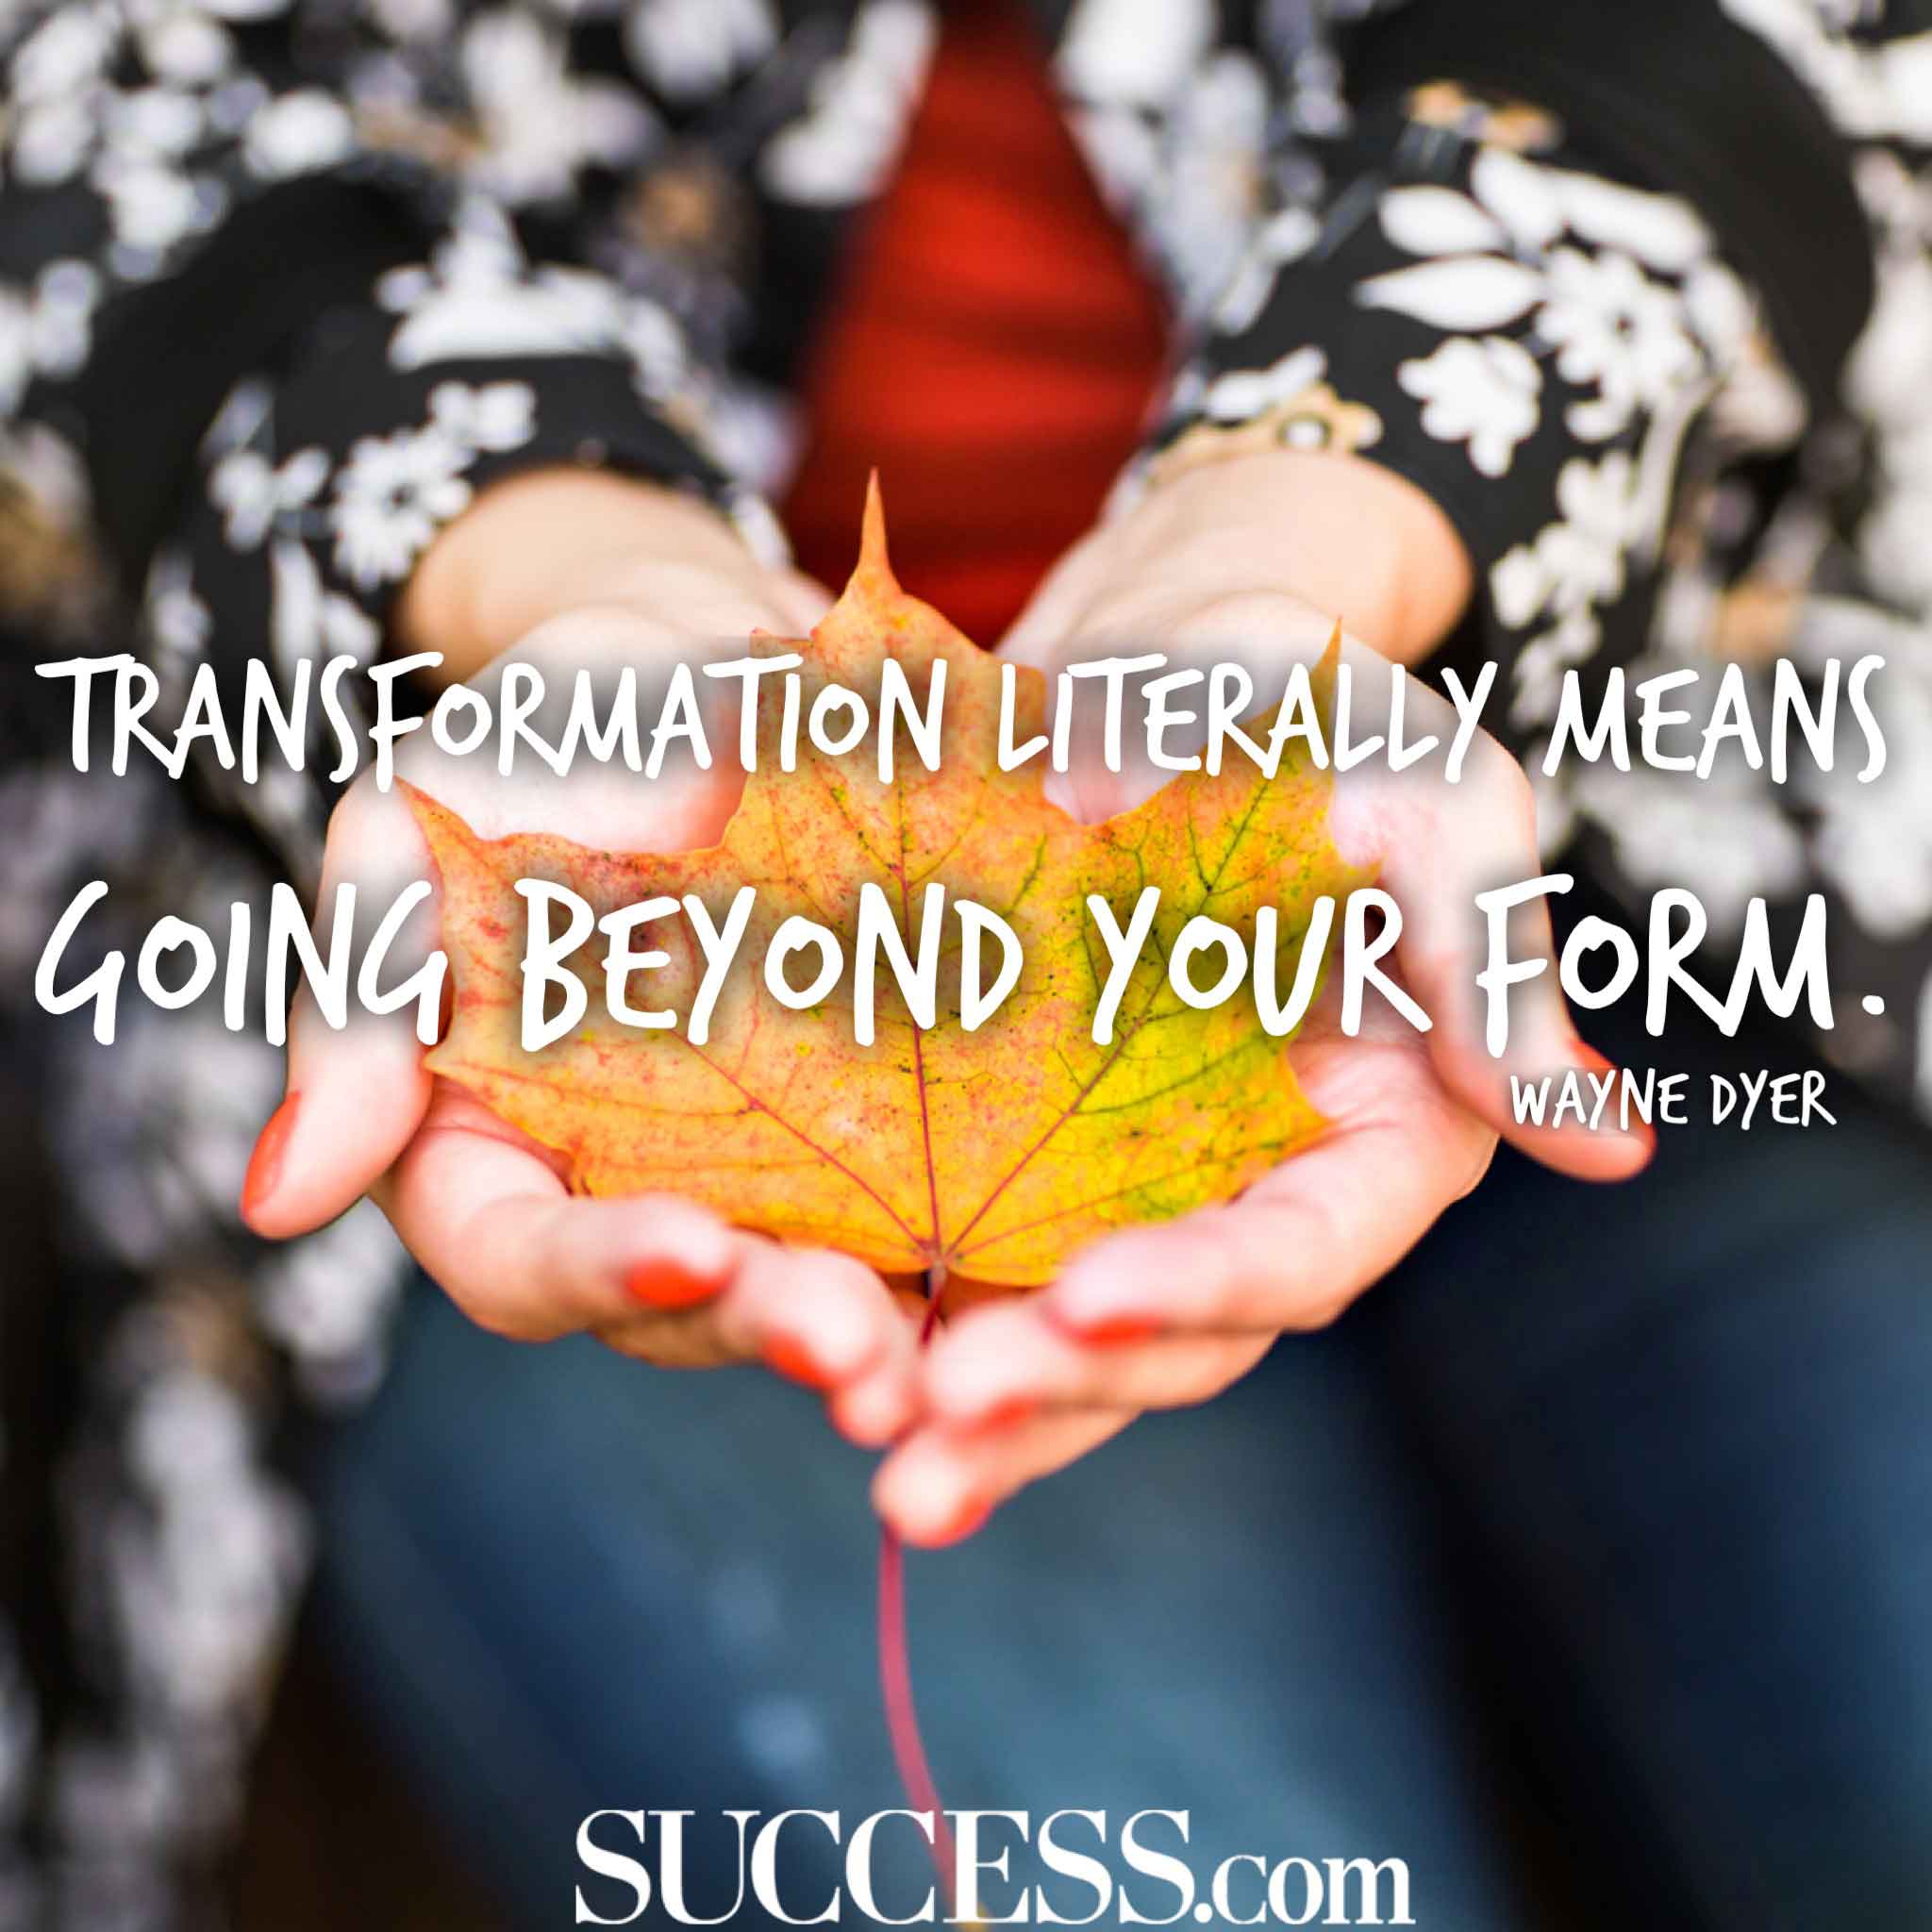 13 Transformative Quotes to Inspire Your Personal Growth